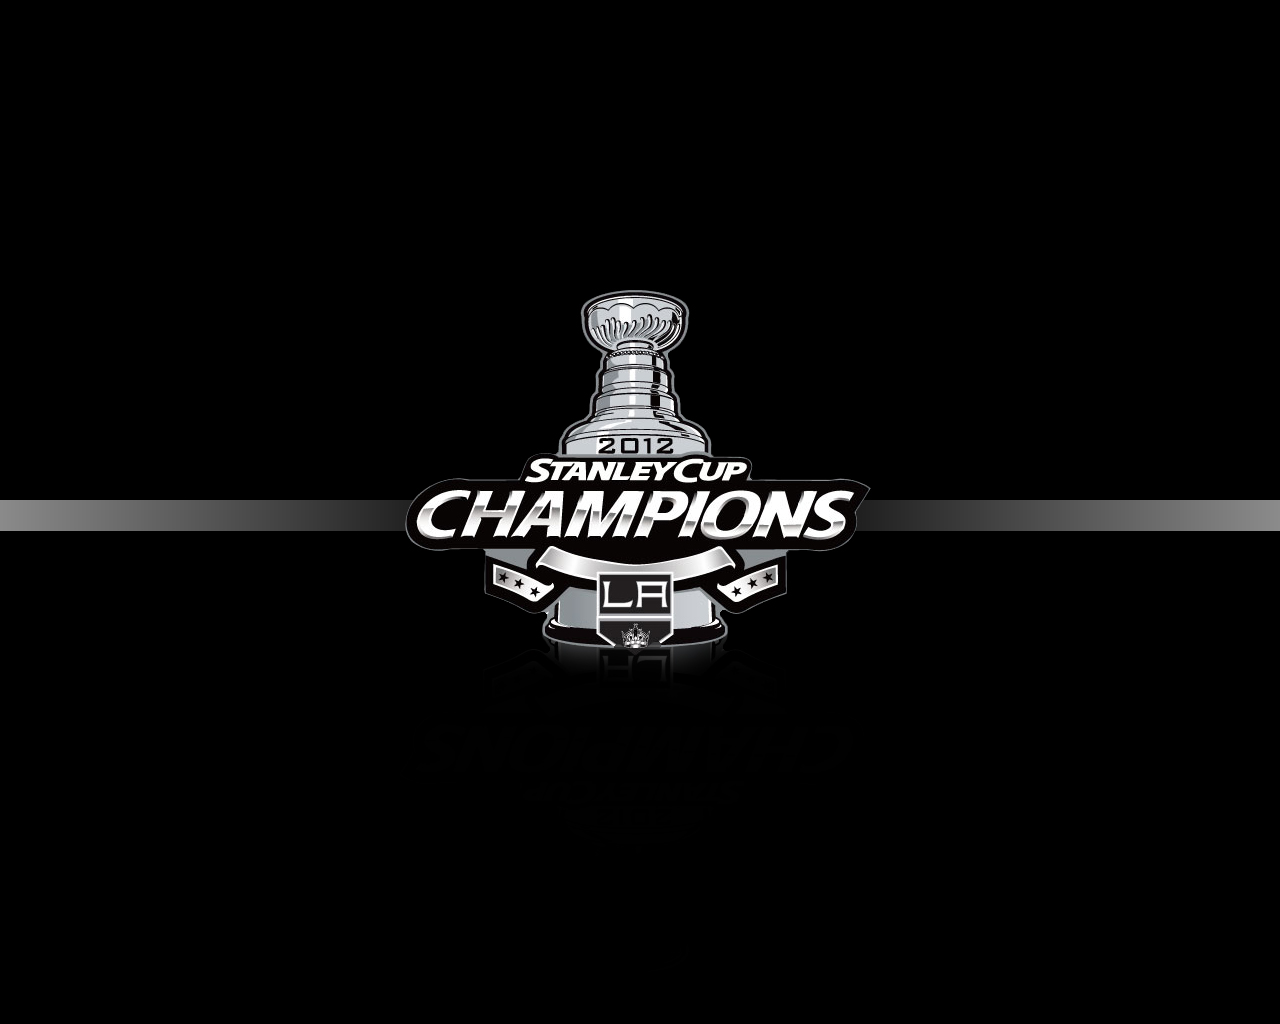  Wallpapers Backgrounds More 2012 LA Kings Stanley Cup Champions